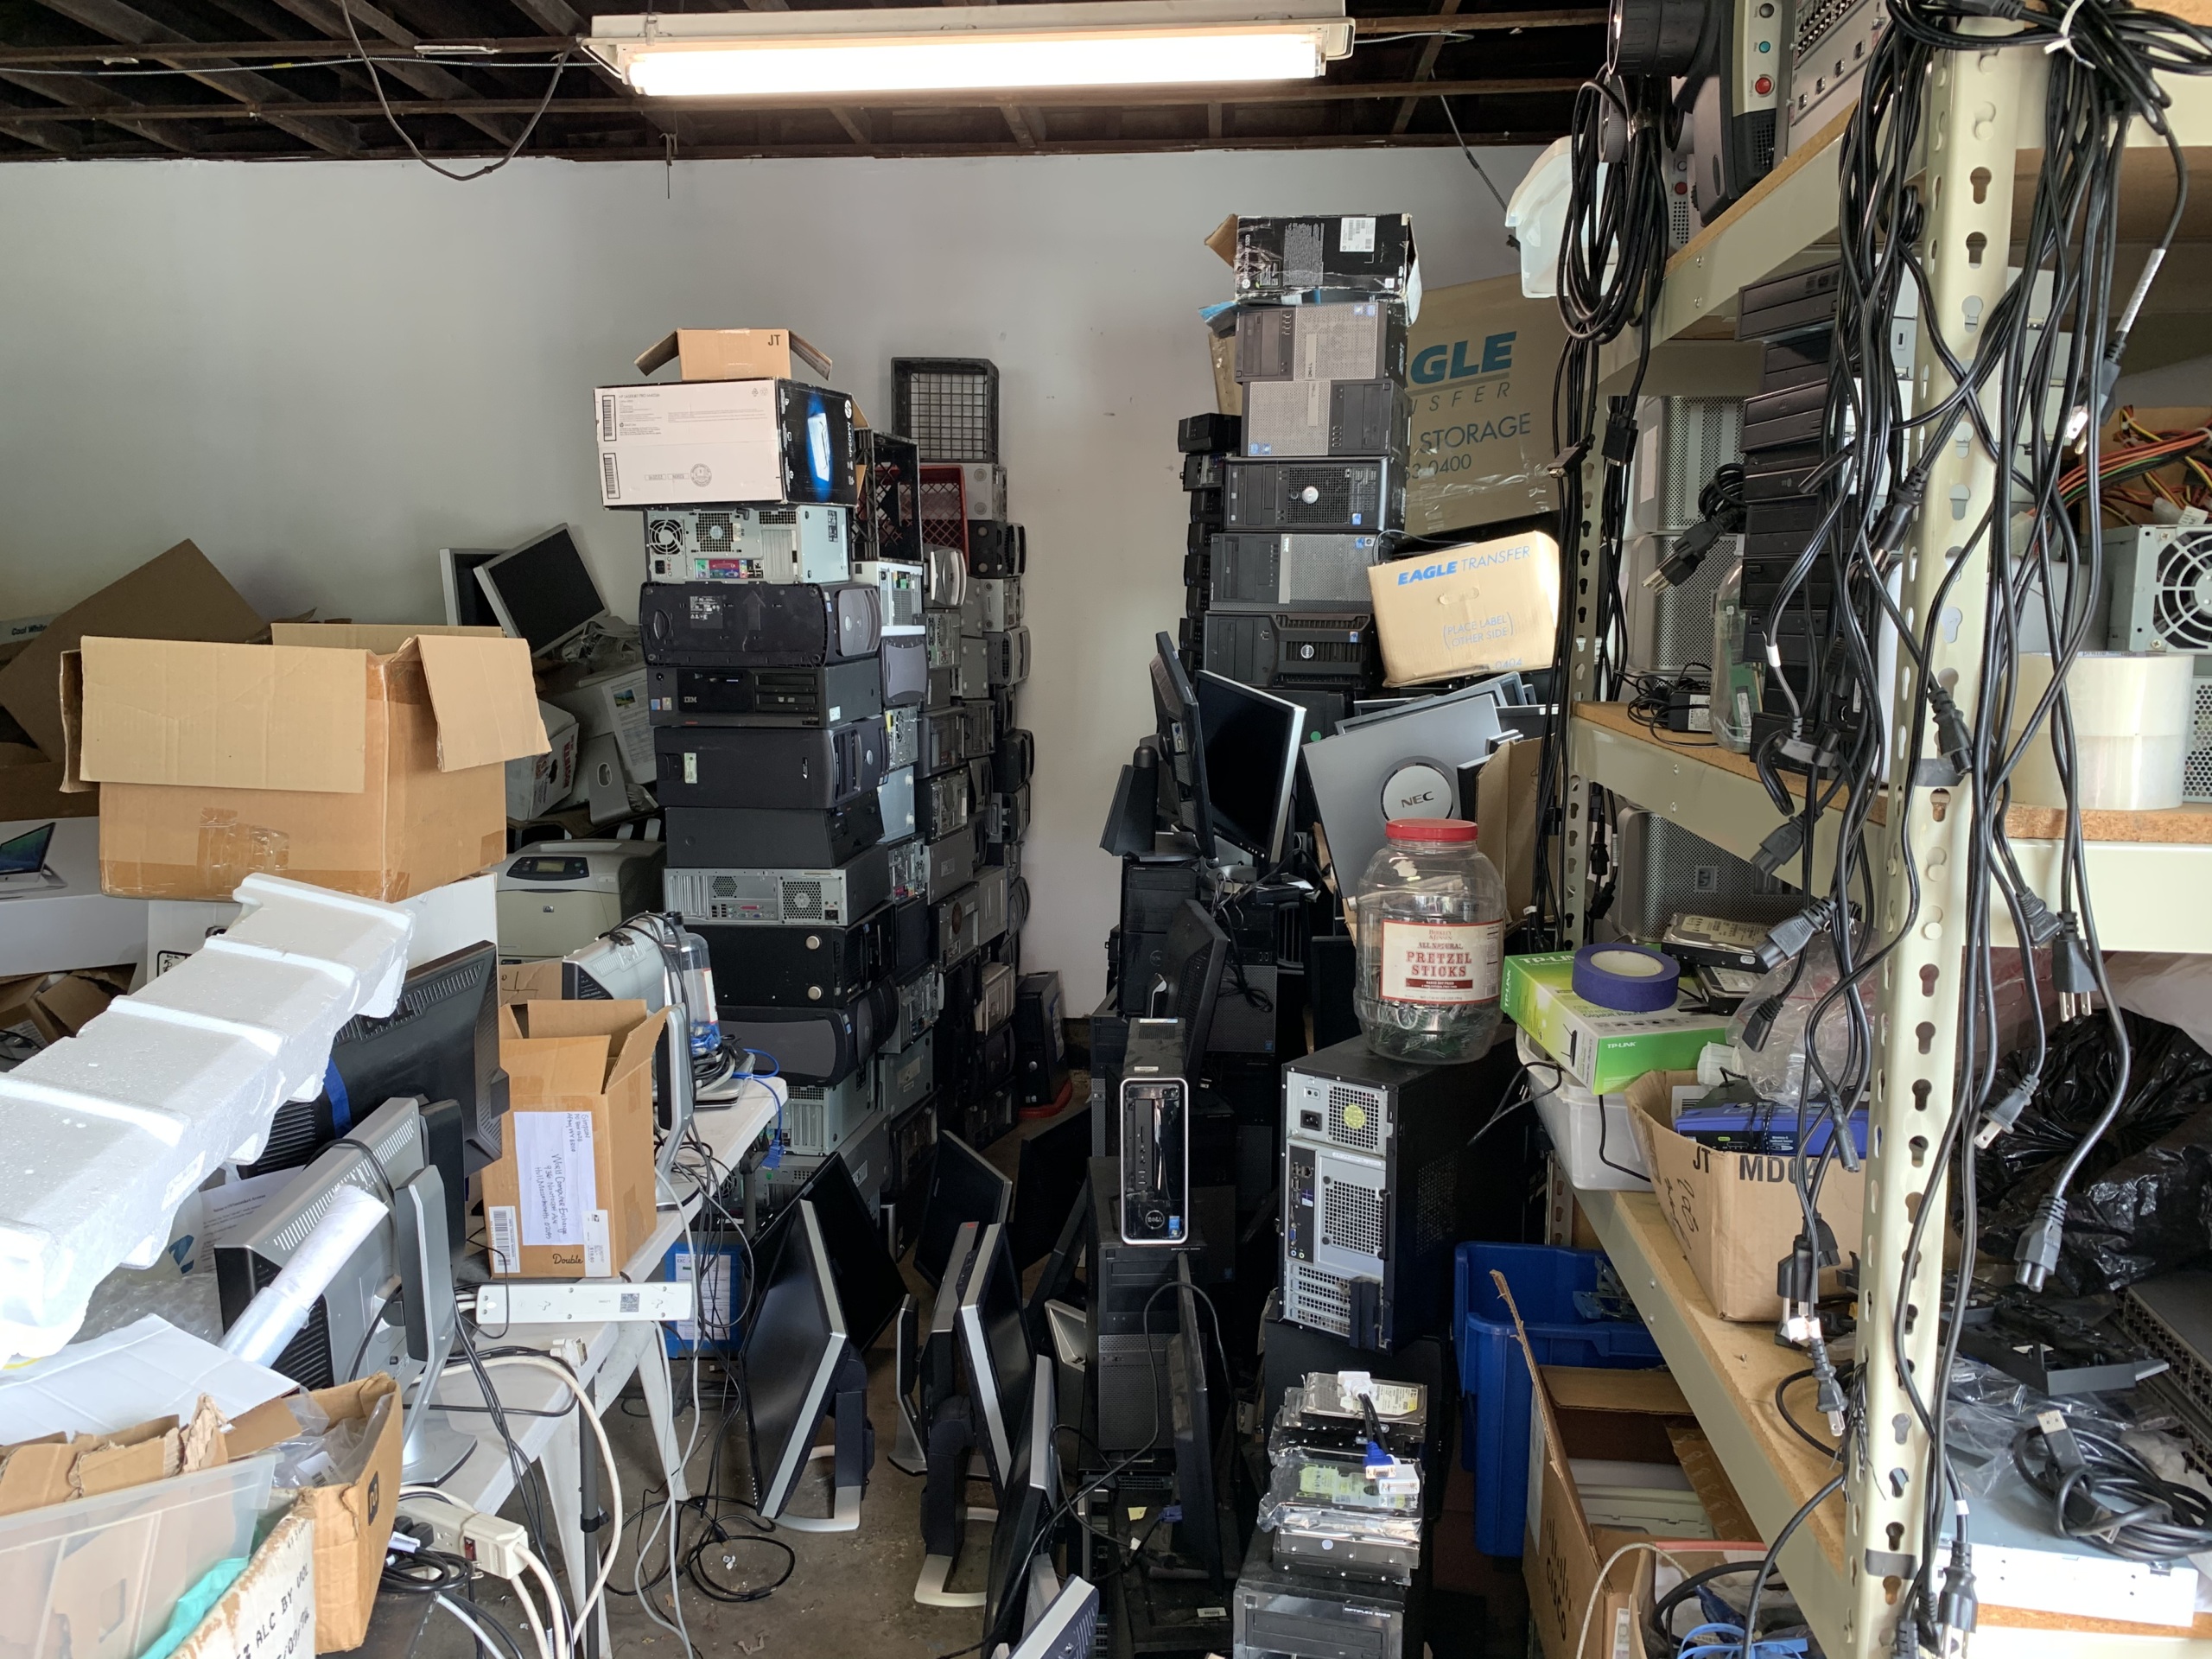 Monitors, desktops, and cables are piled floor to ceiling in a local garage.